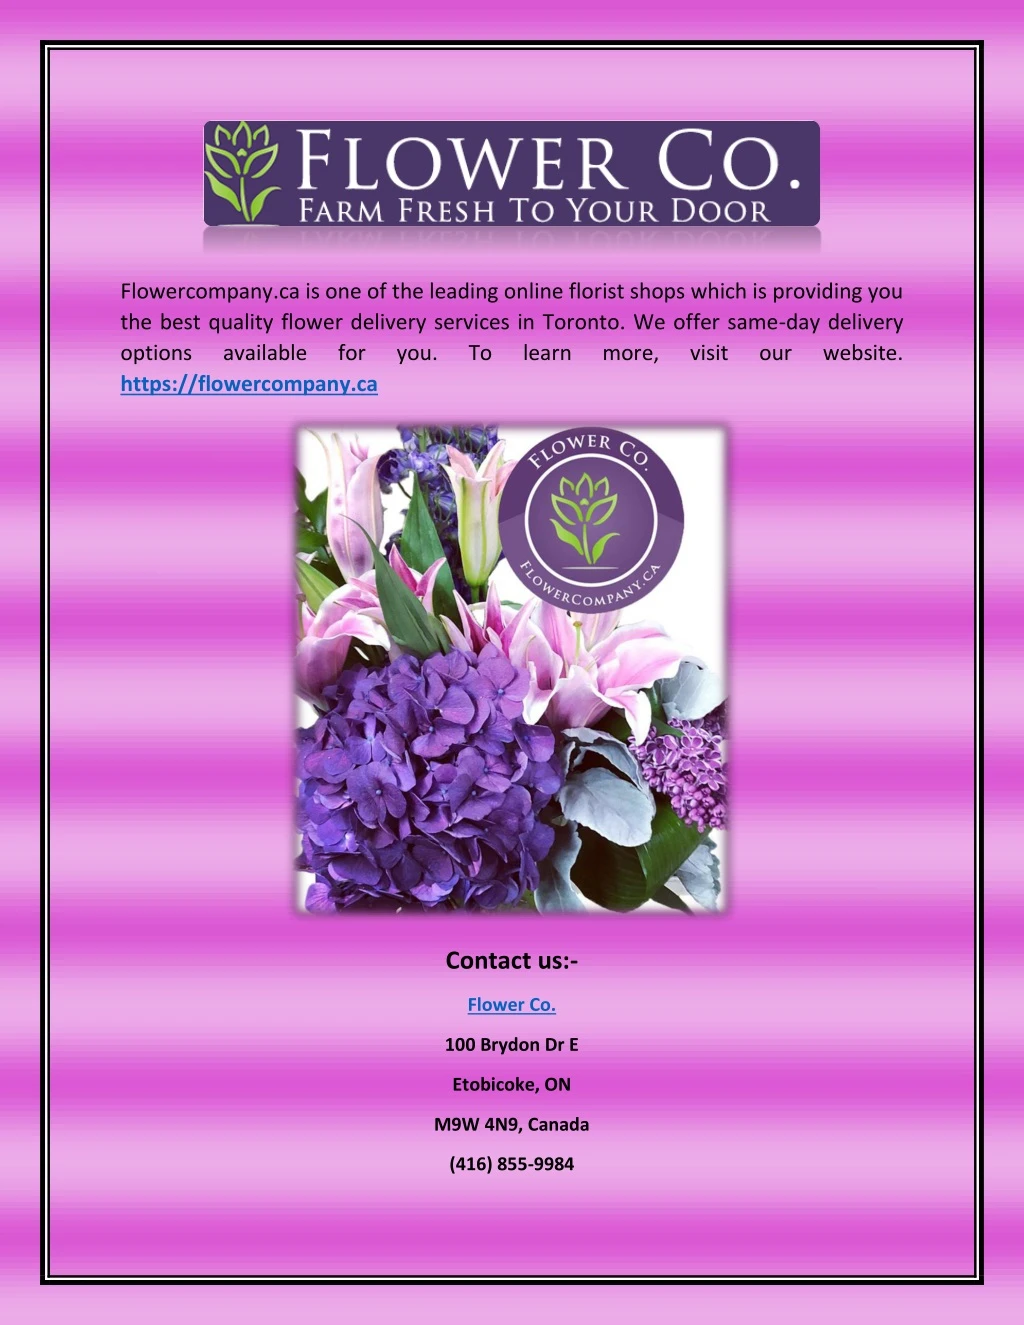 flowercompany ca is one of the leading online